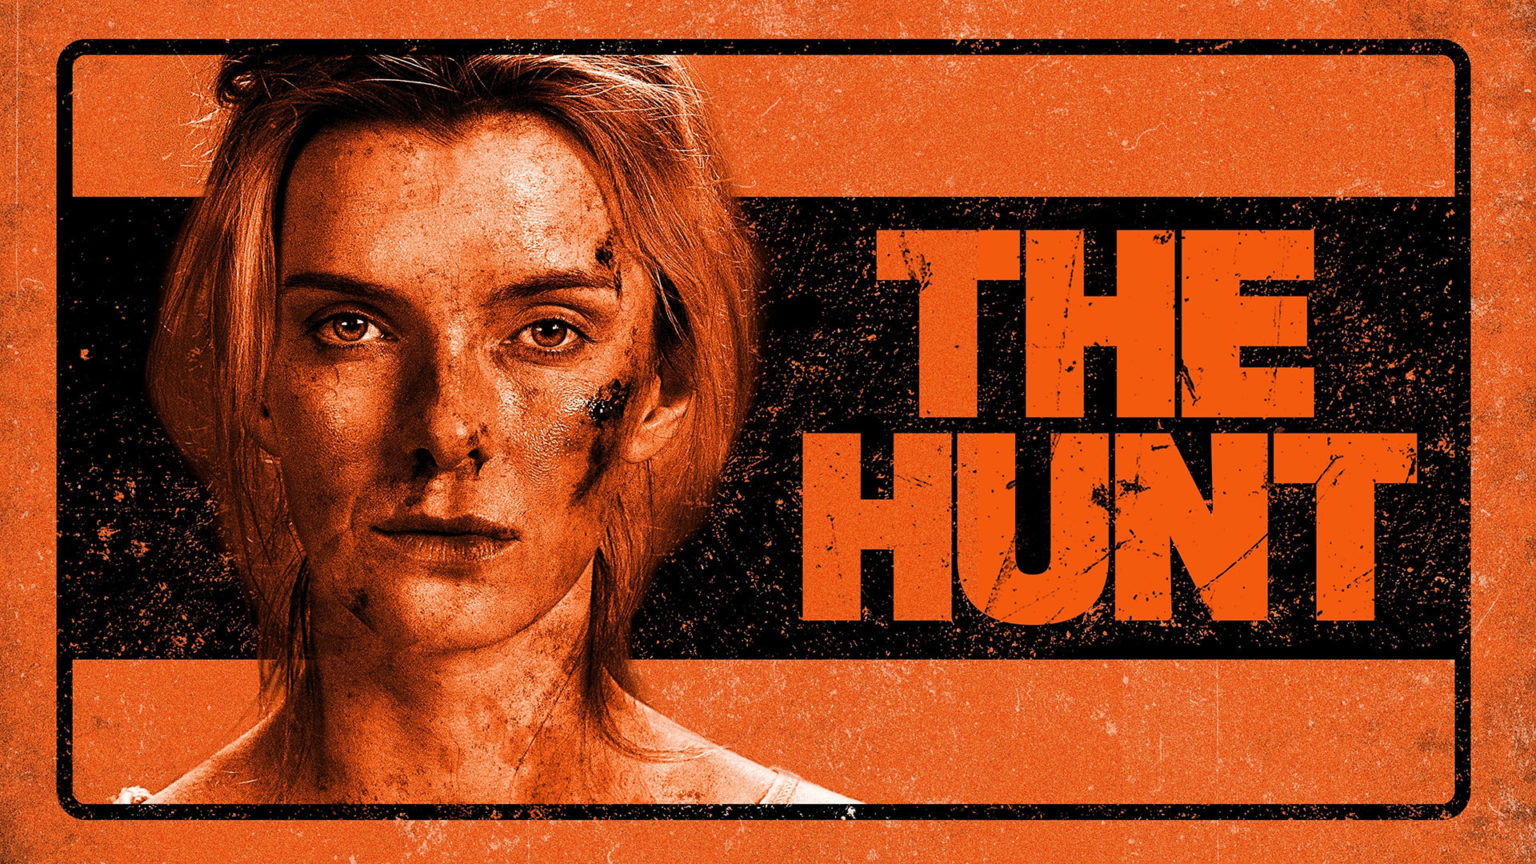 the hunt 2013 movie review